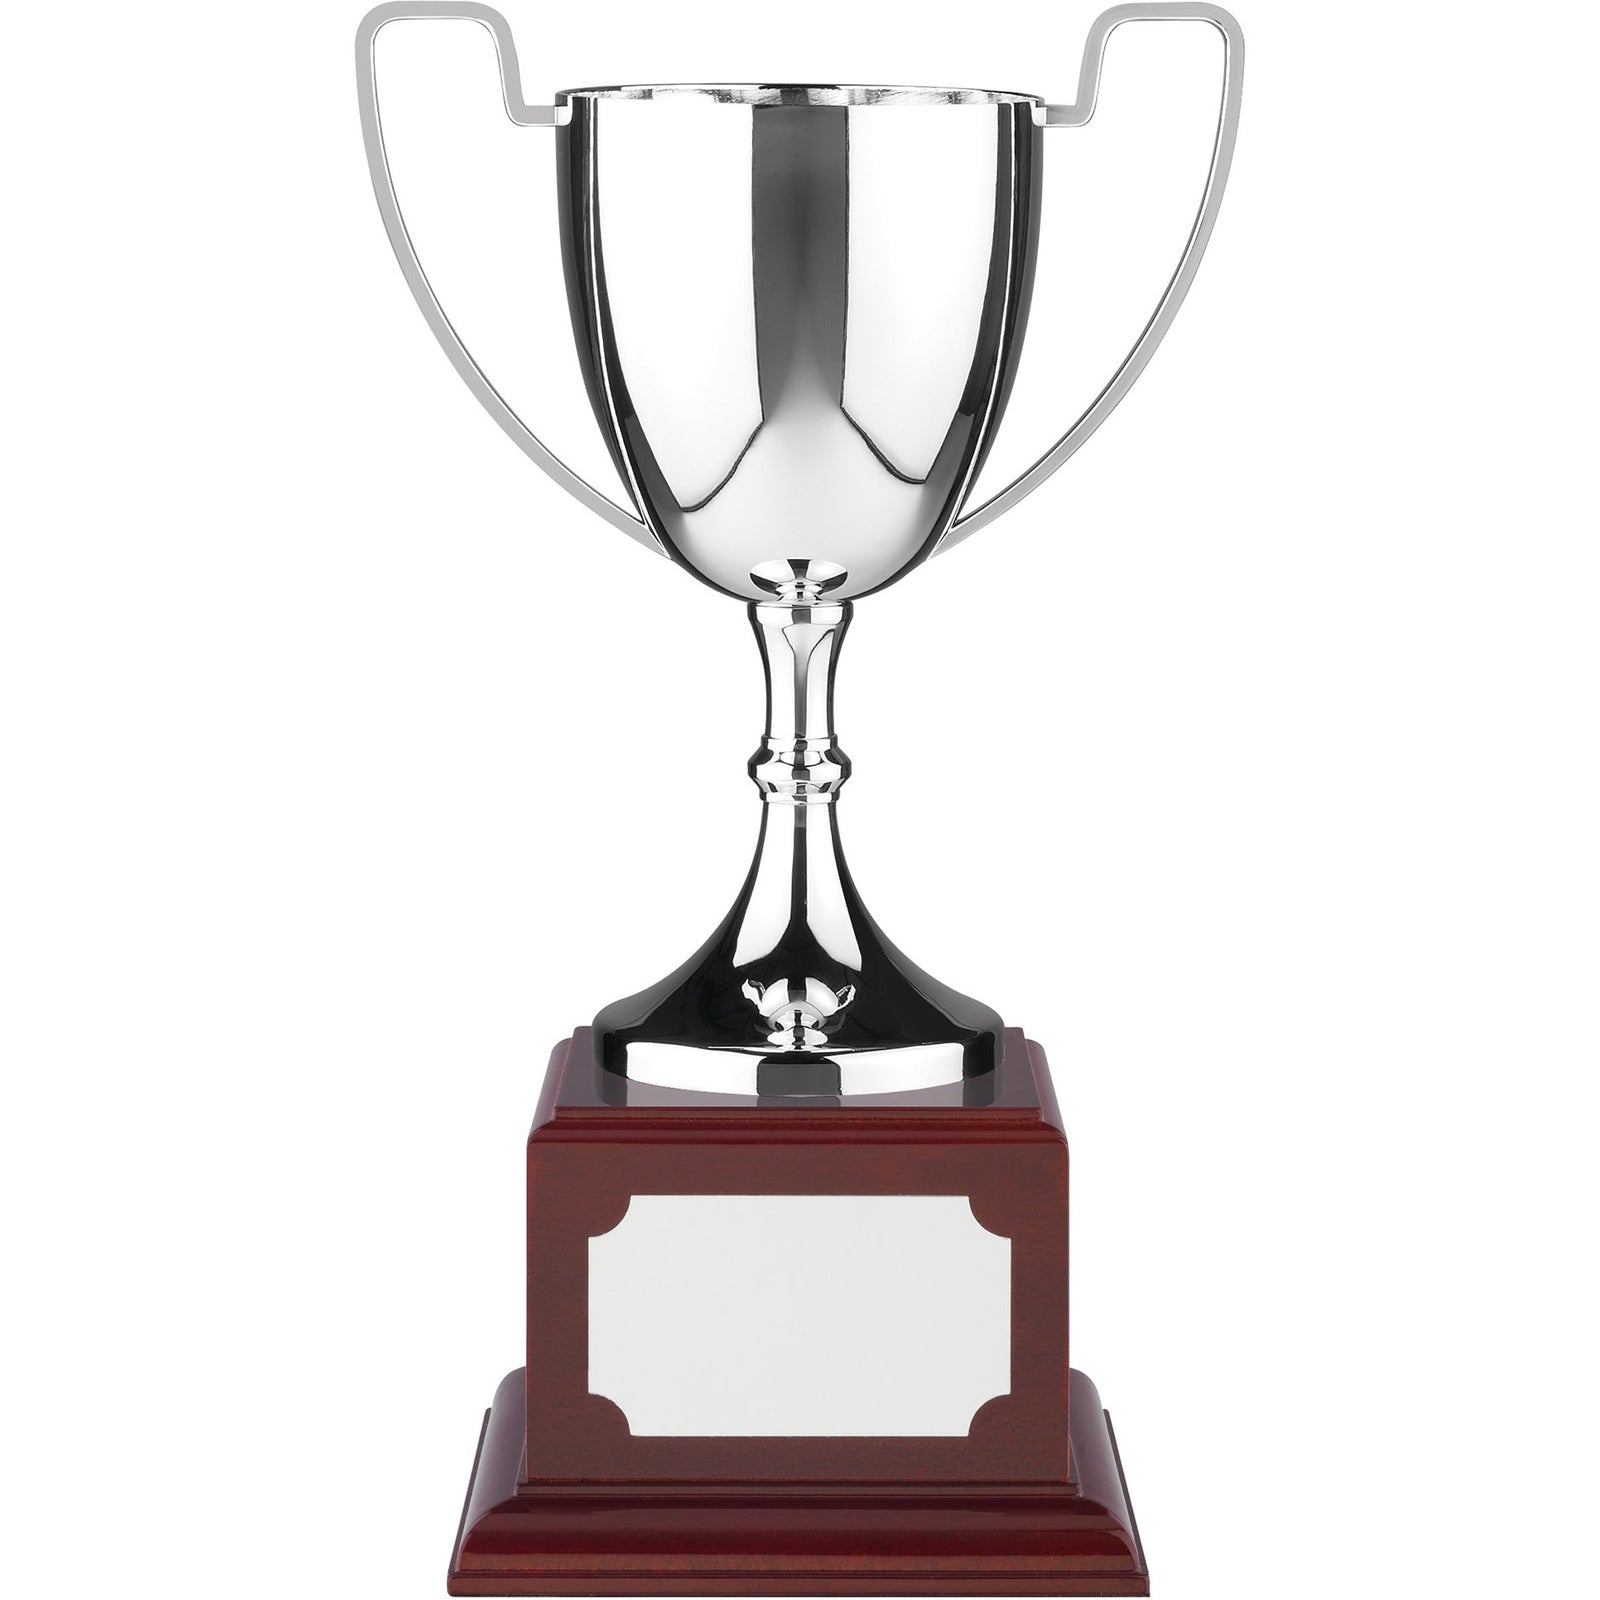 Classic Endurance Trophy Cup on Square Rosewood Base